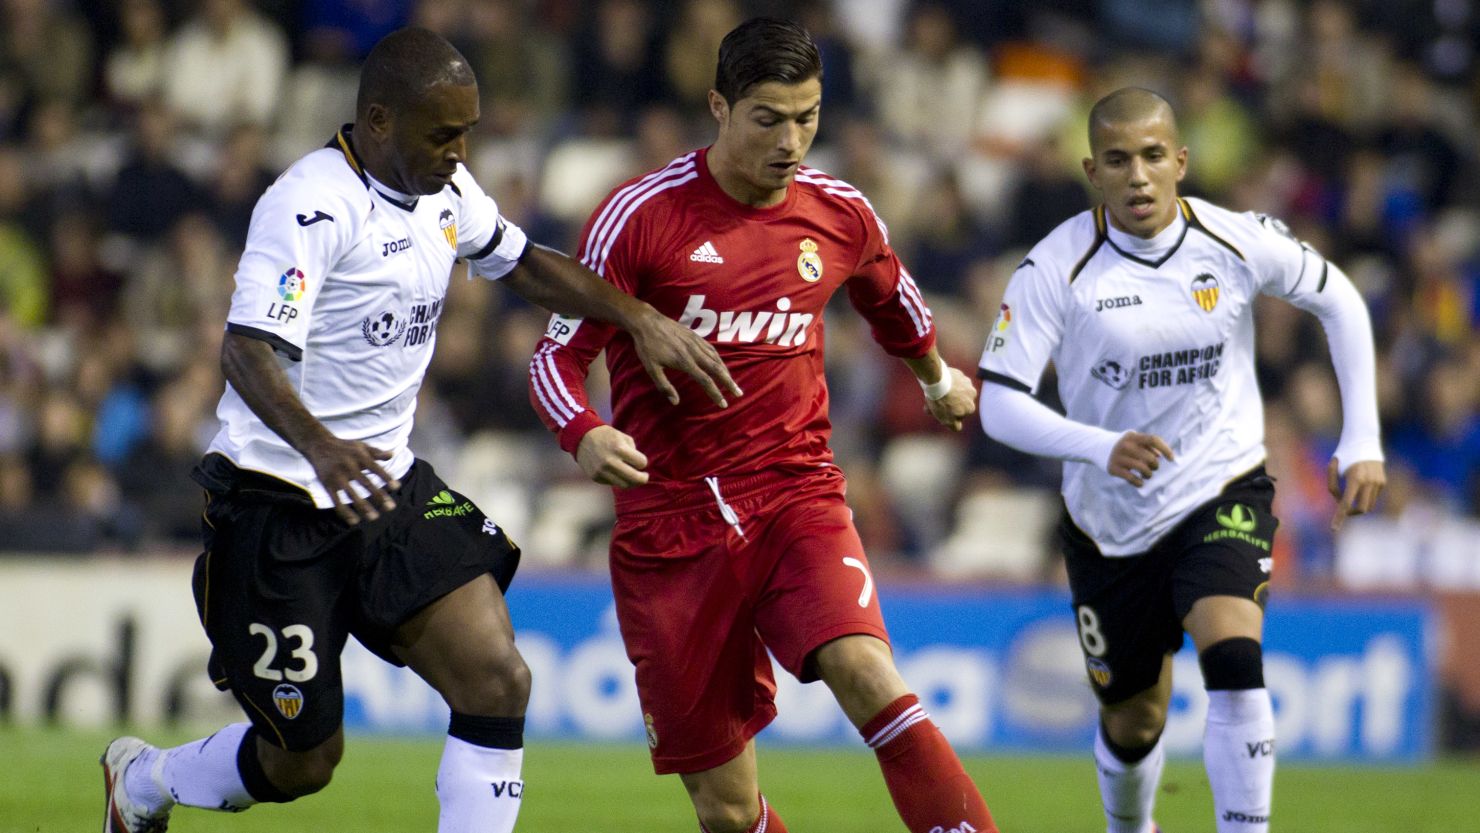 Cristiano Ronaldo, center, scored the decisive third goal for Real Madrid at the Mestalla on Saturday.